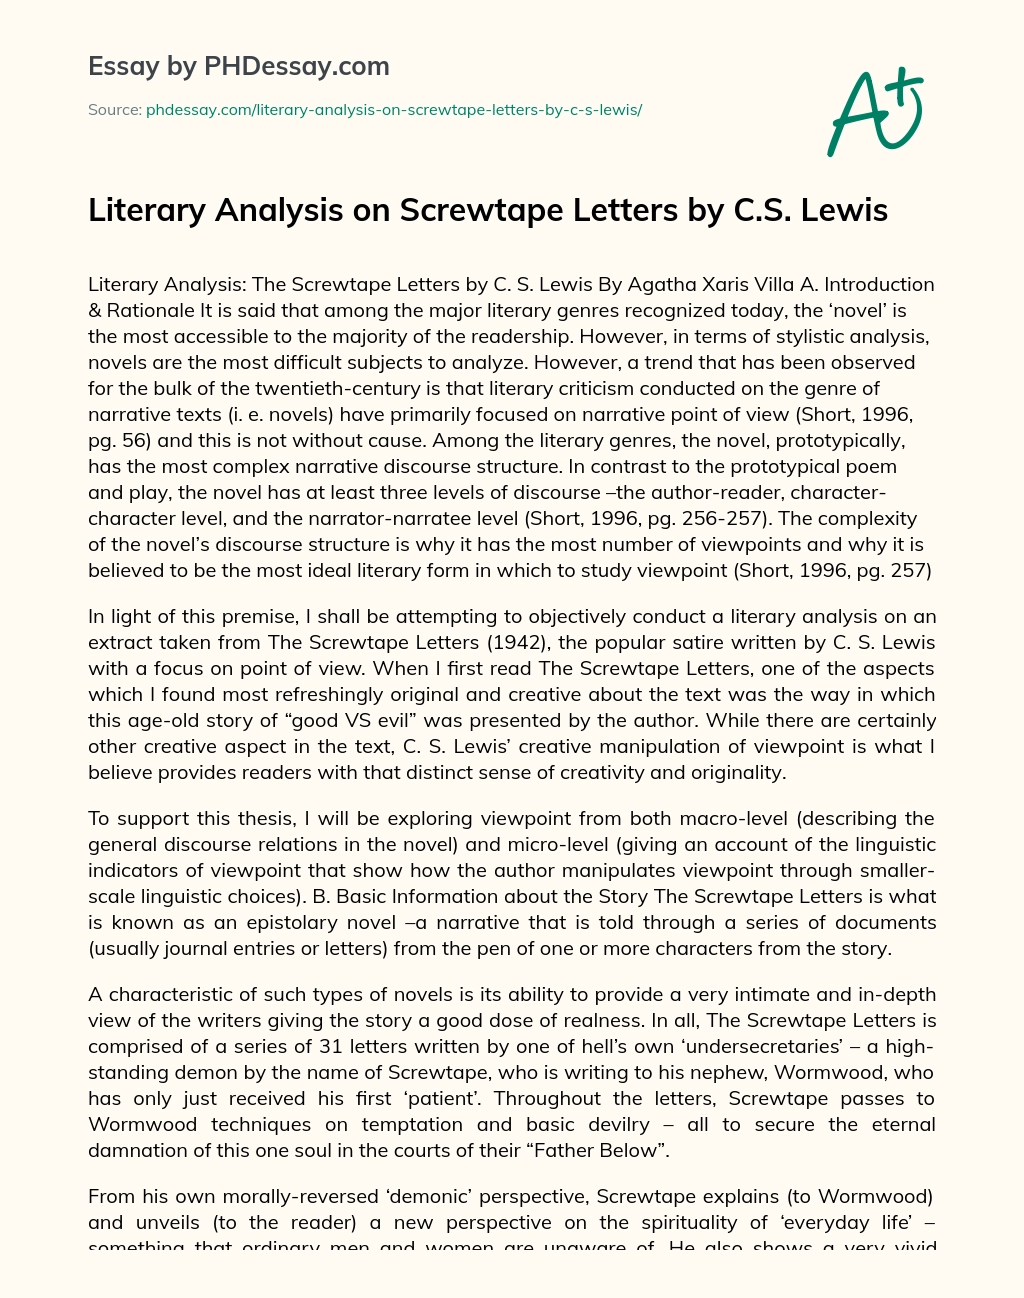 Literary Analysis on Screwtape Letters by C.S. Lewis essay